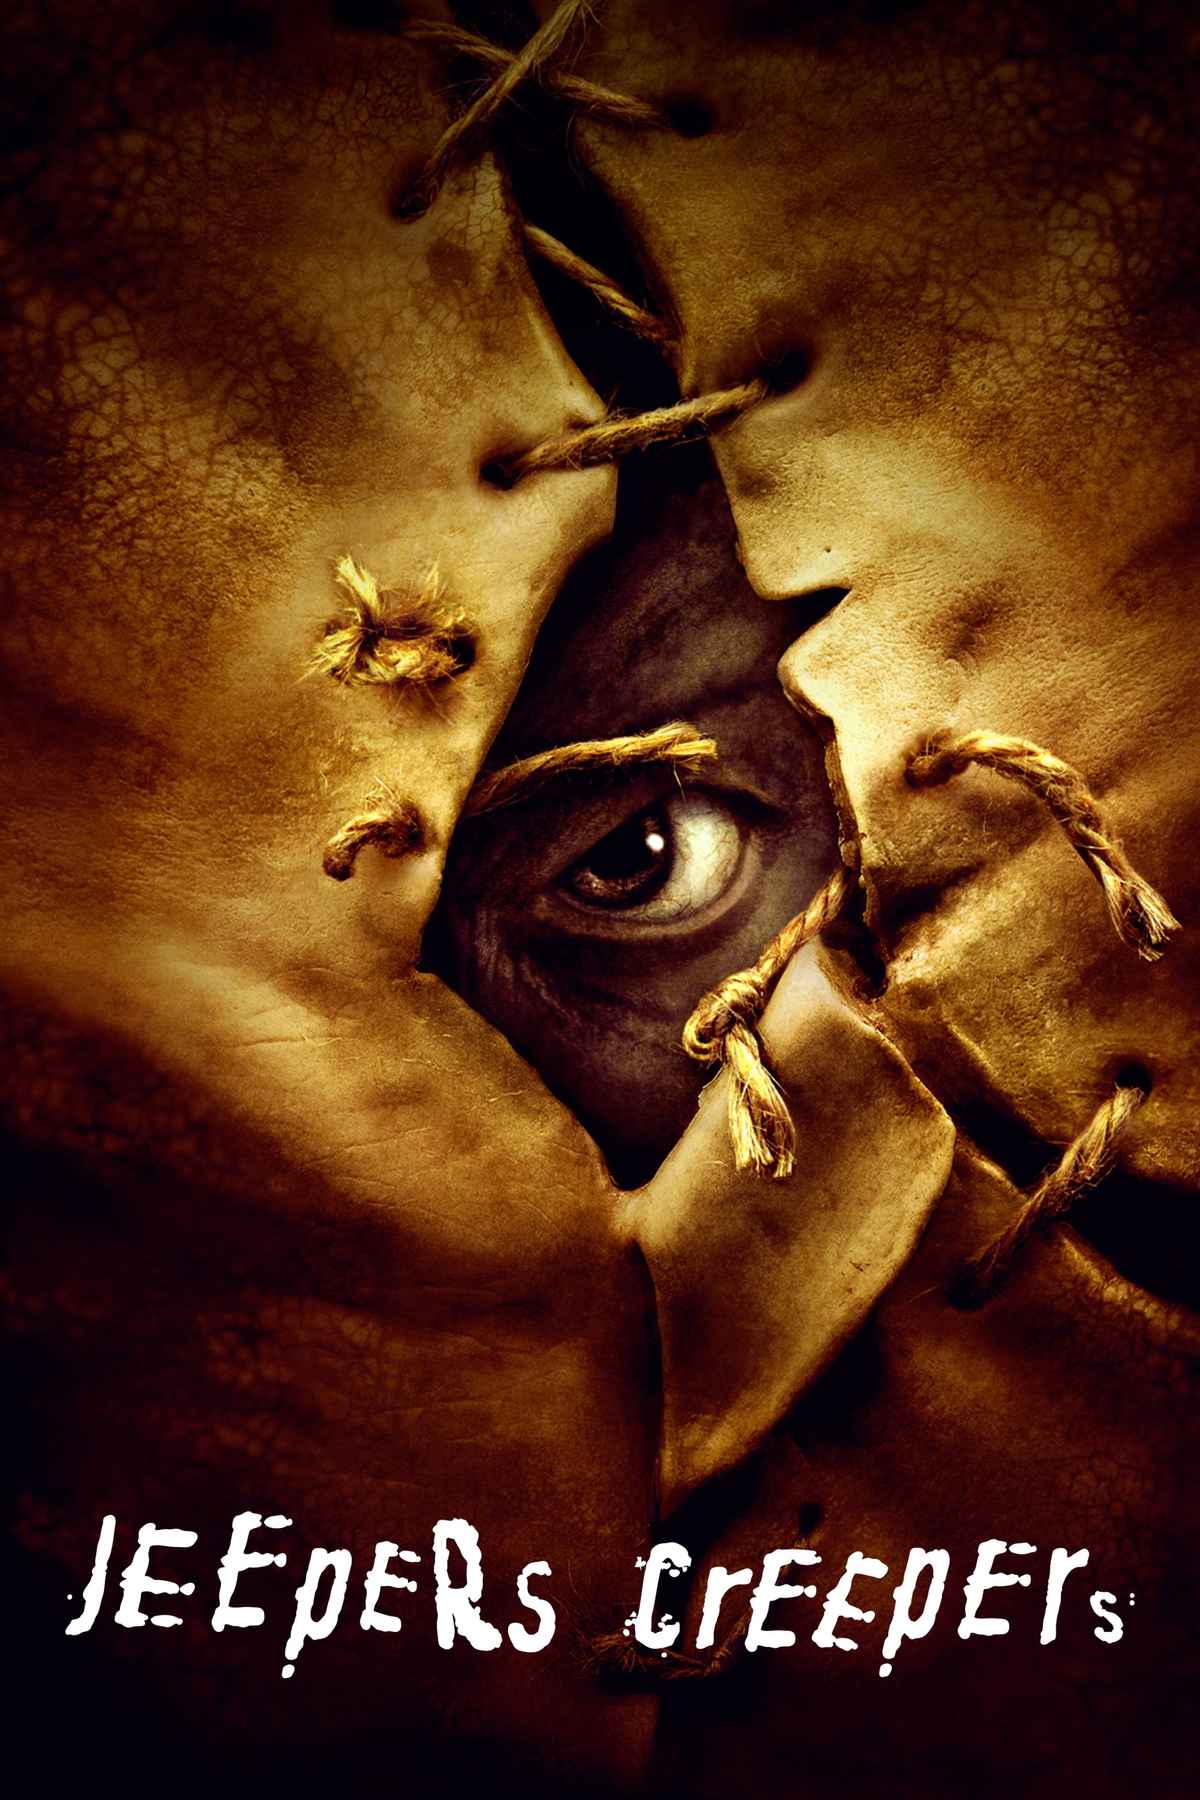 watch jeepers creepers full movie